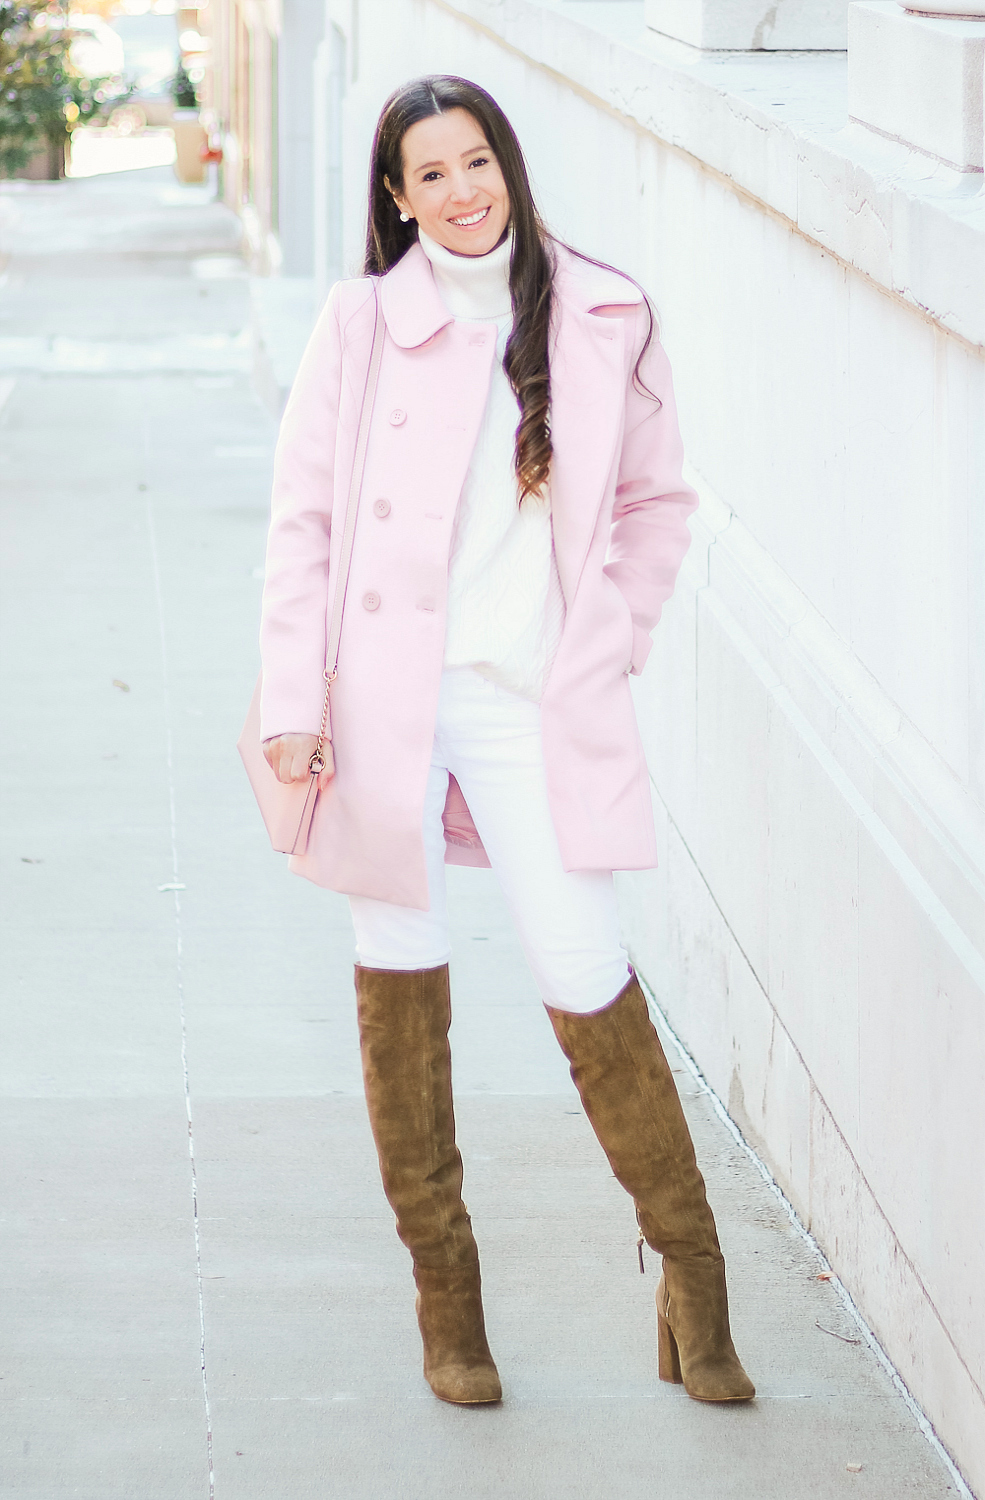 How to Wear a Light Pink Winter Coat by affordable fashion blogger Stephanie Ziajka from Diary of a Debutante, Allegra K Women's Peter Pan Collar Double Breasted Winter Coat, cute winter coats under 100, cute winter coats on amazon, winter whites with pops of pink